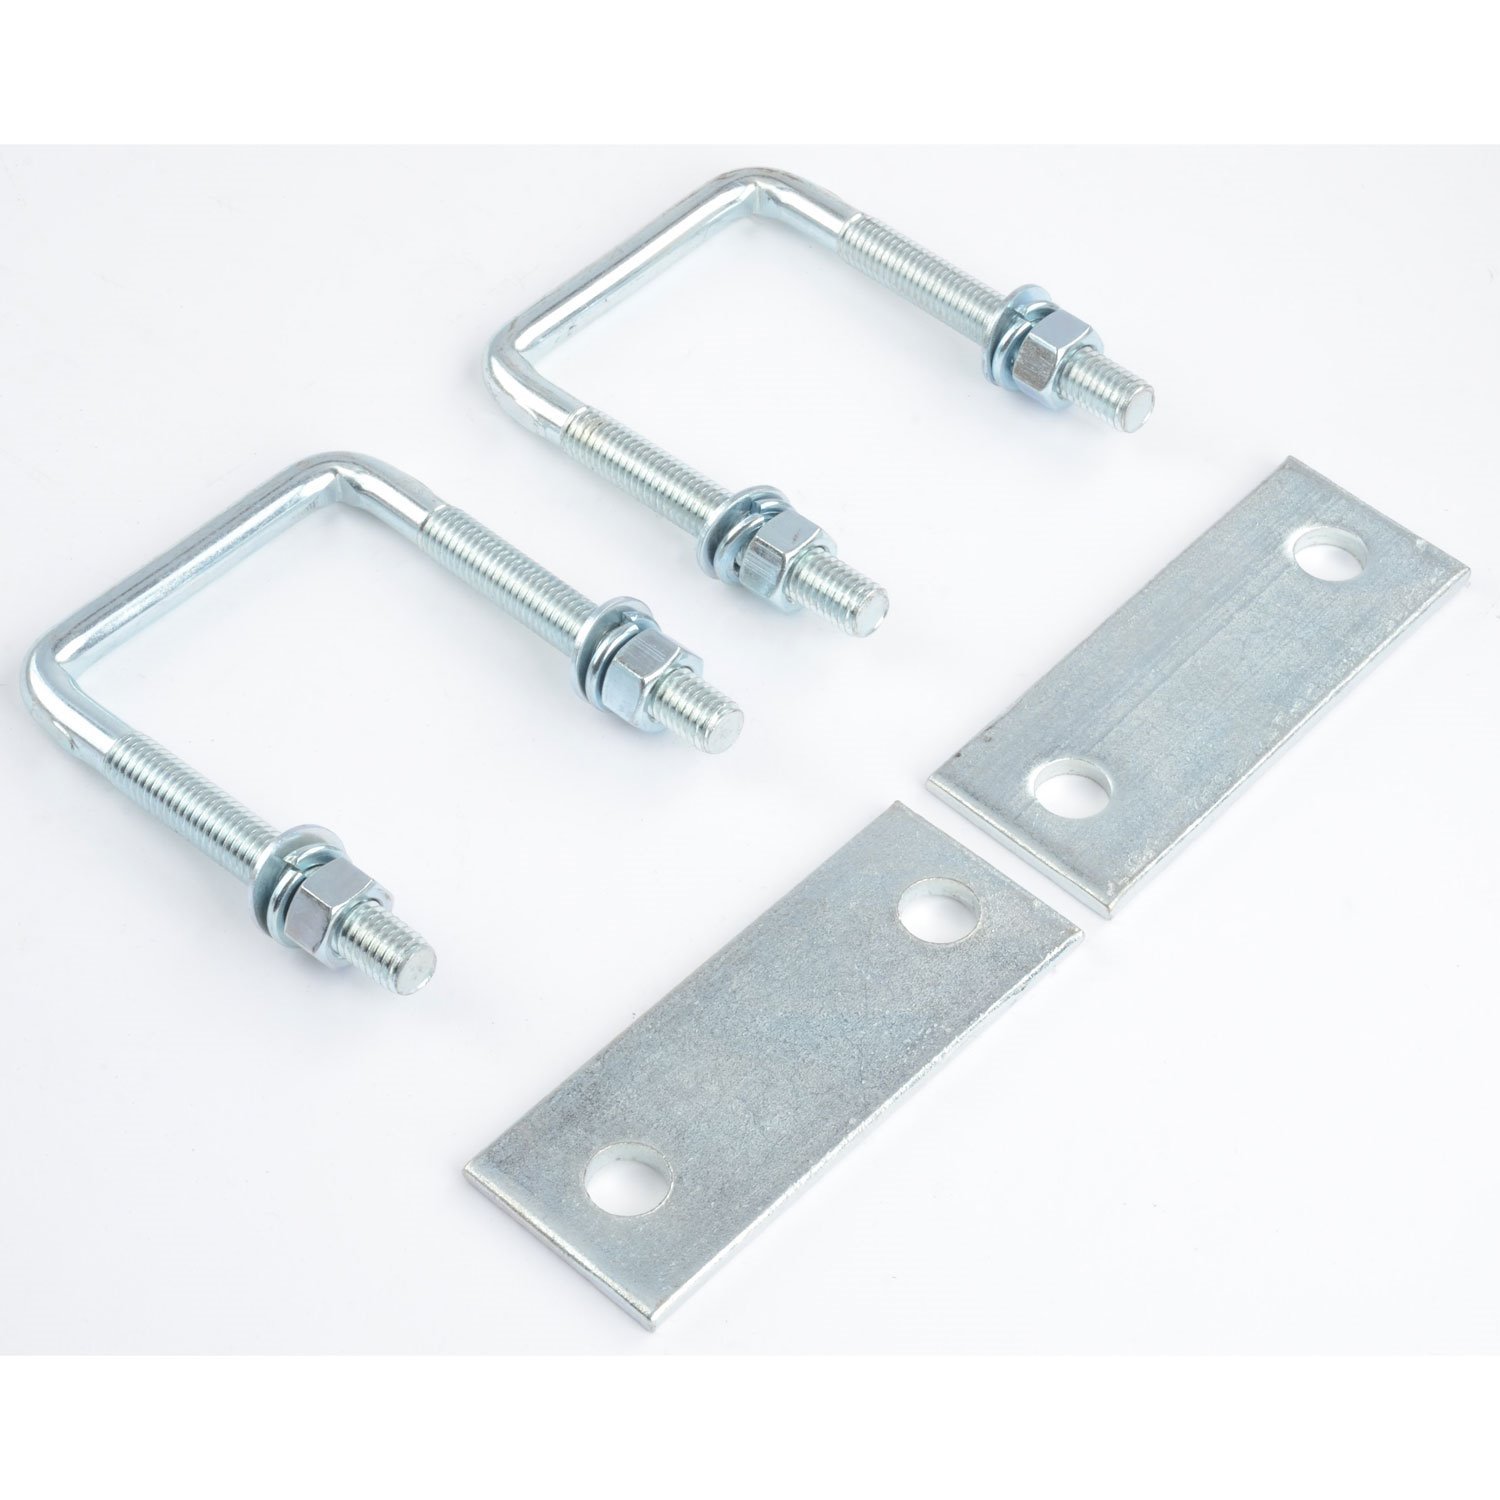 Leaf Spring Clamp Kit with 3